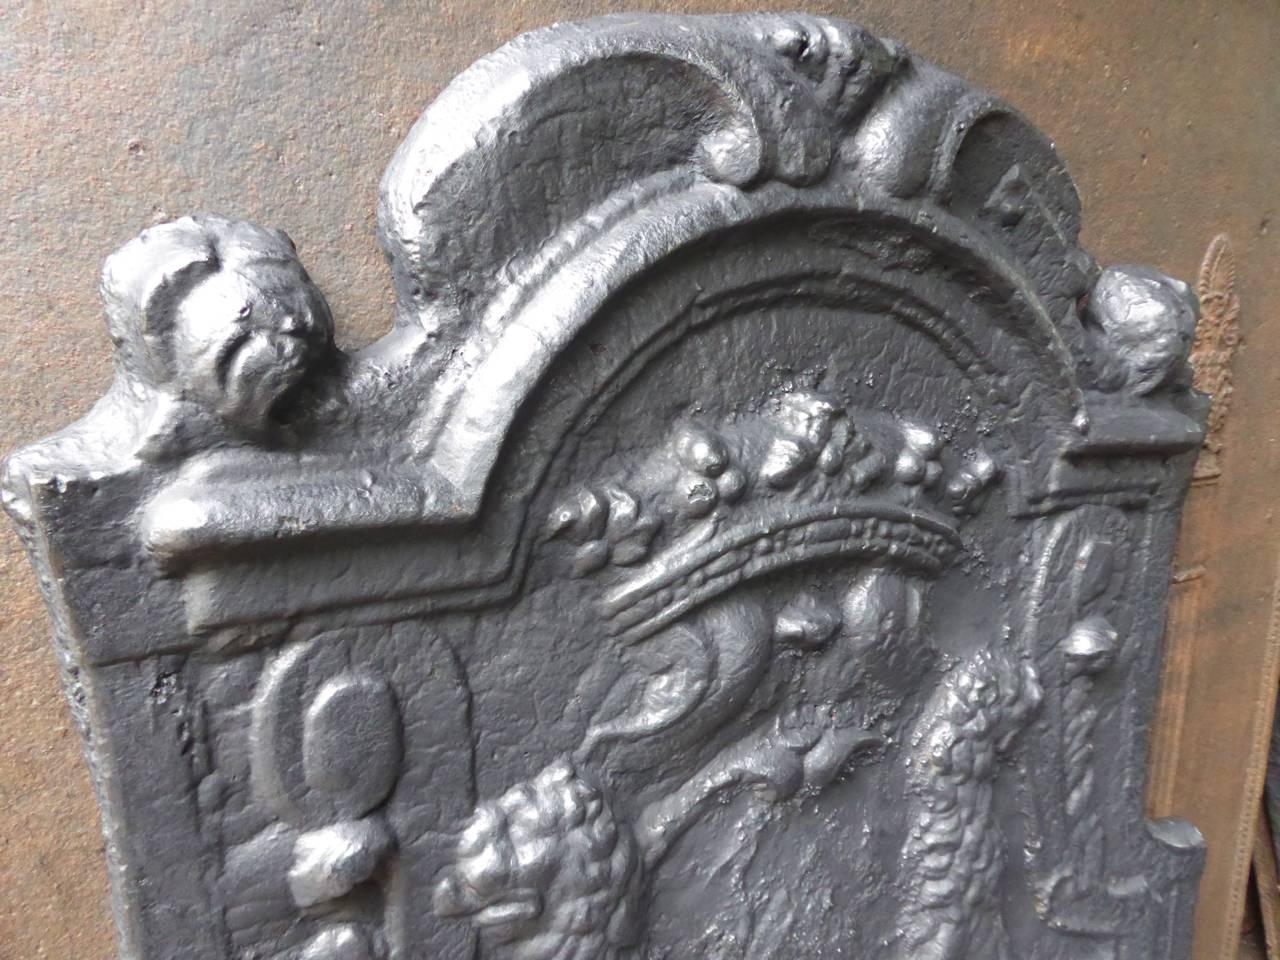 French fireback with a coat of arms. Two lions are carrying a shield and a crown.

We have a unique and specialized collection of antique and used fireplace accessories consisting of more than 1000 listings at 1stdibs. Amongst others we always have